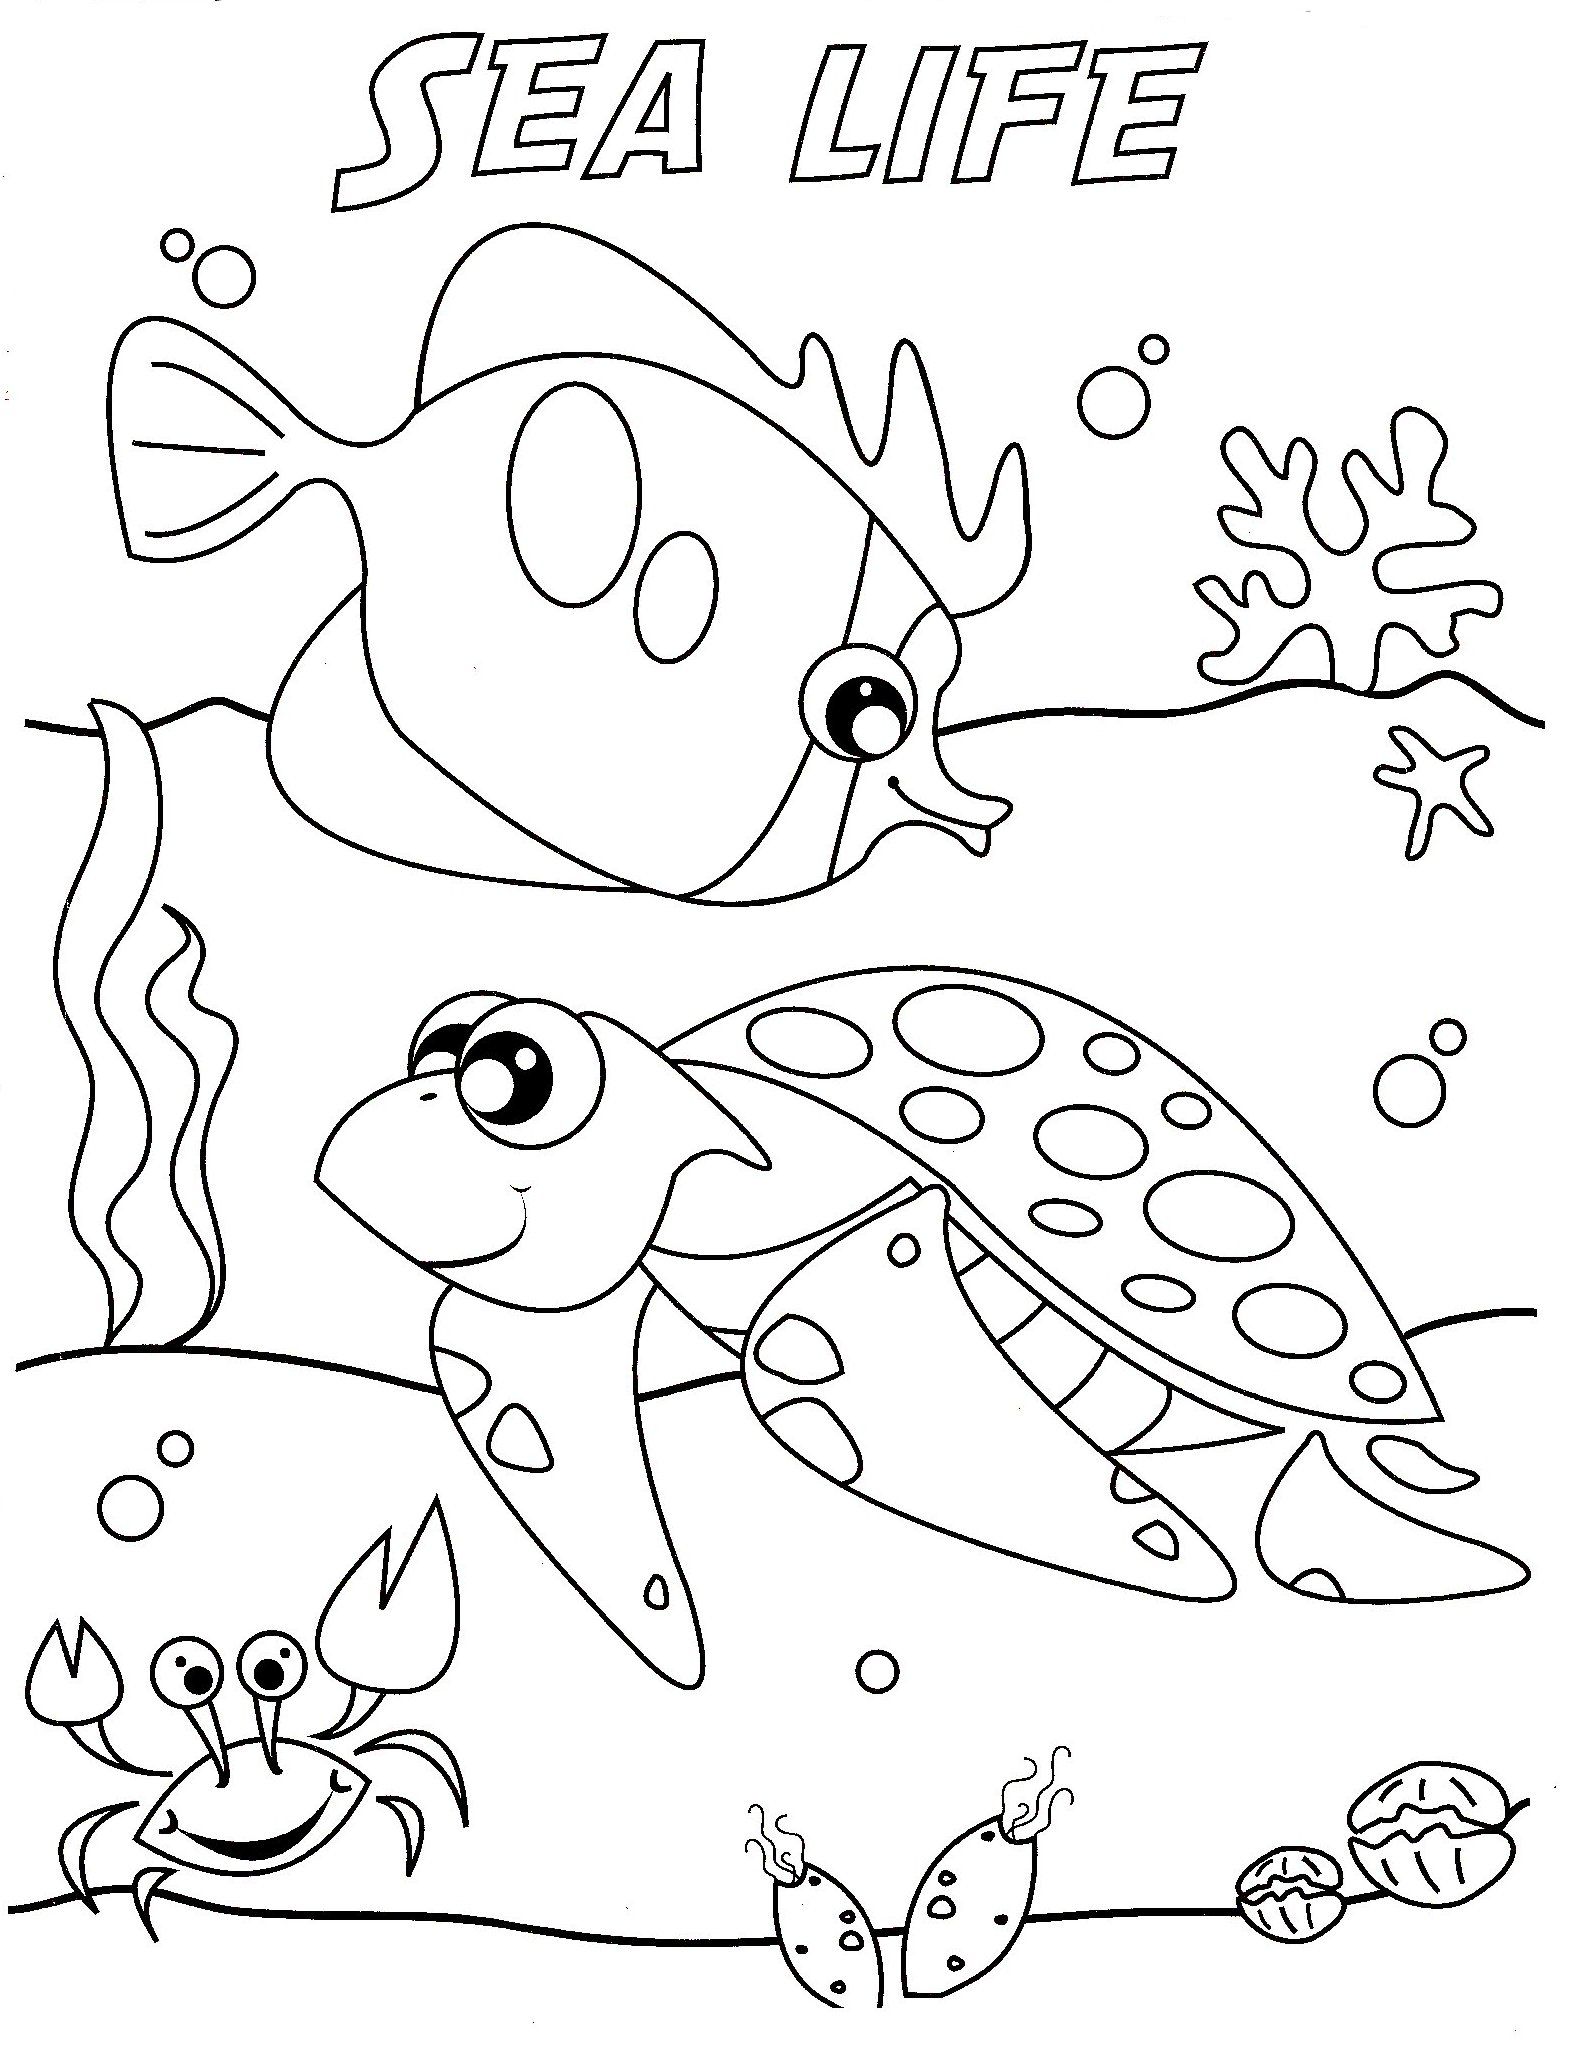 Ocean Waves Coloring Pages - Coloring Home